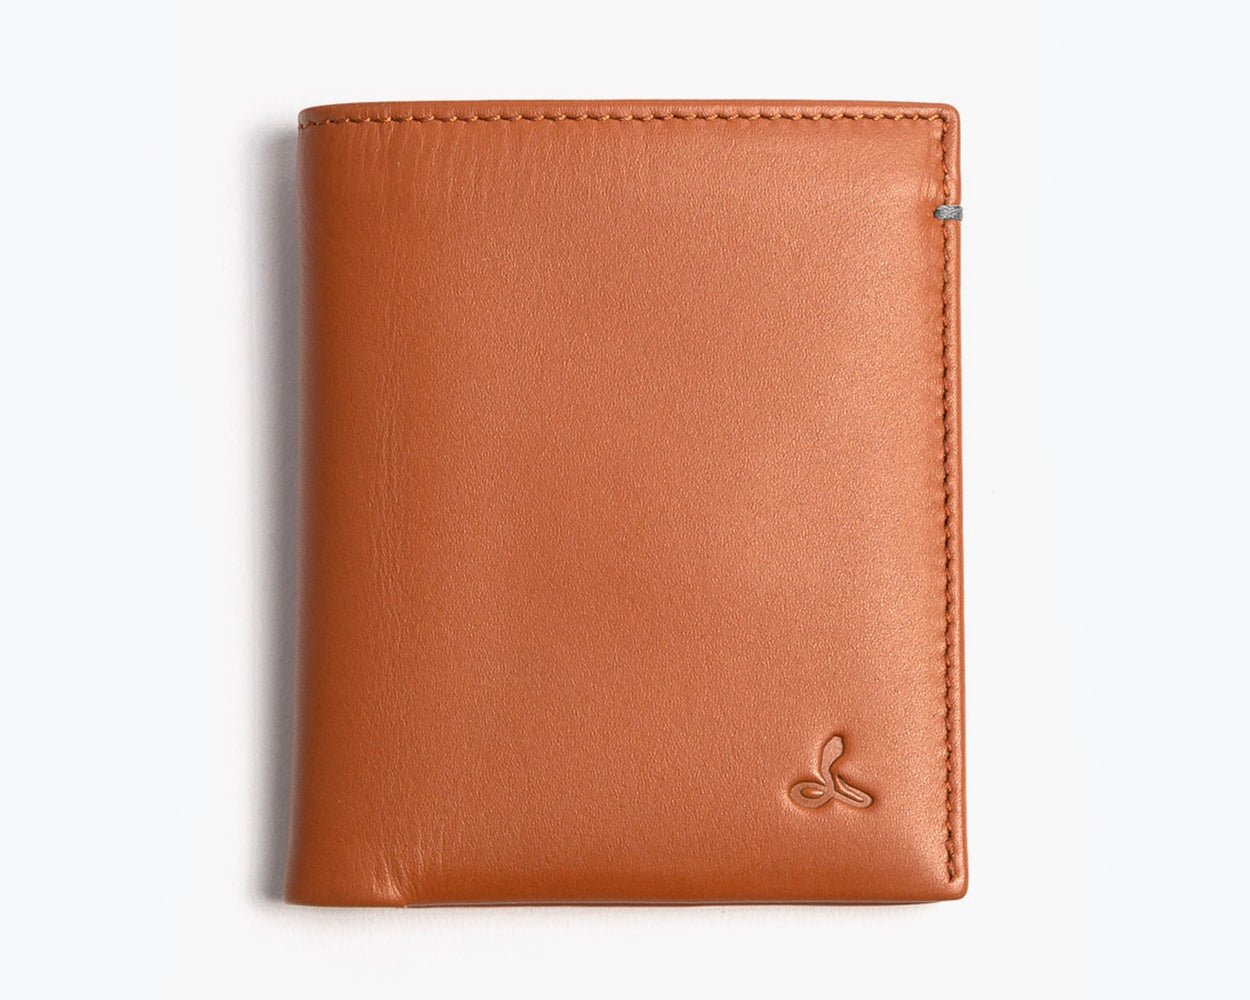 LEATHER BIFOLD WALLET - THE ESSENTIAL COLLECTION Tan/Grey - Snakehive UK